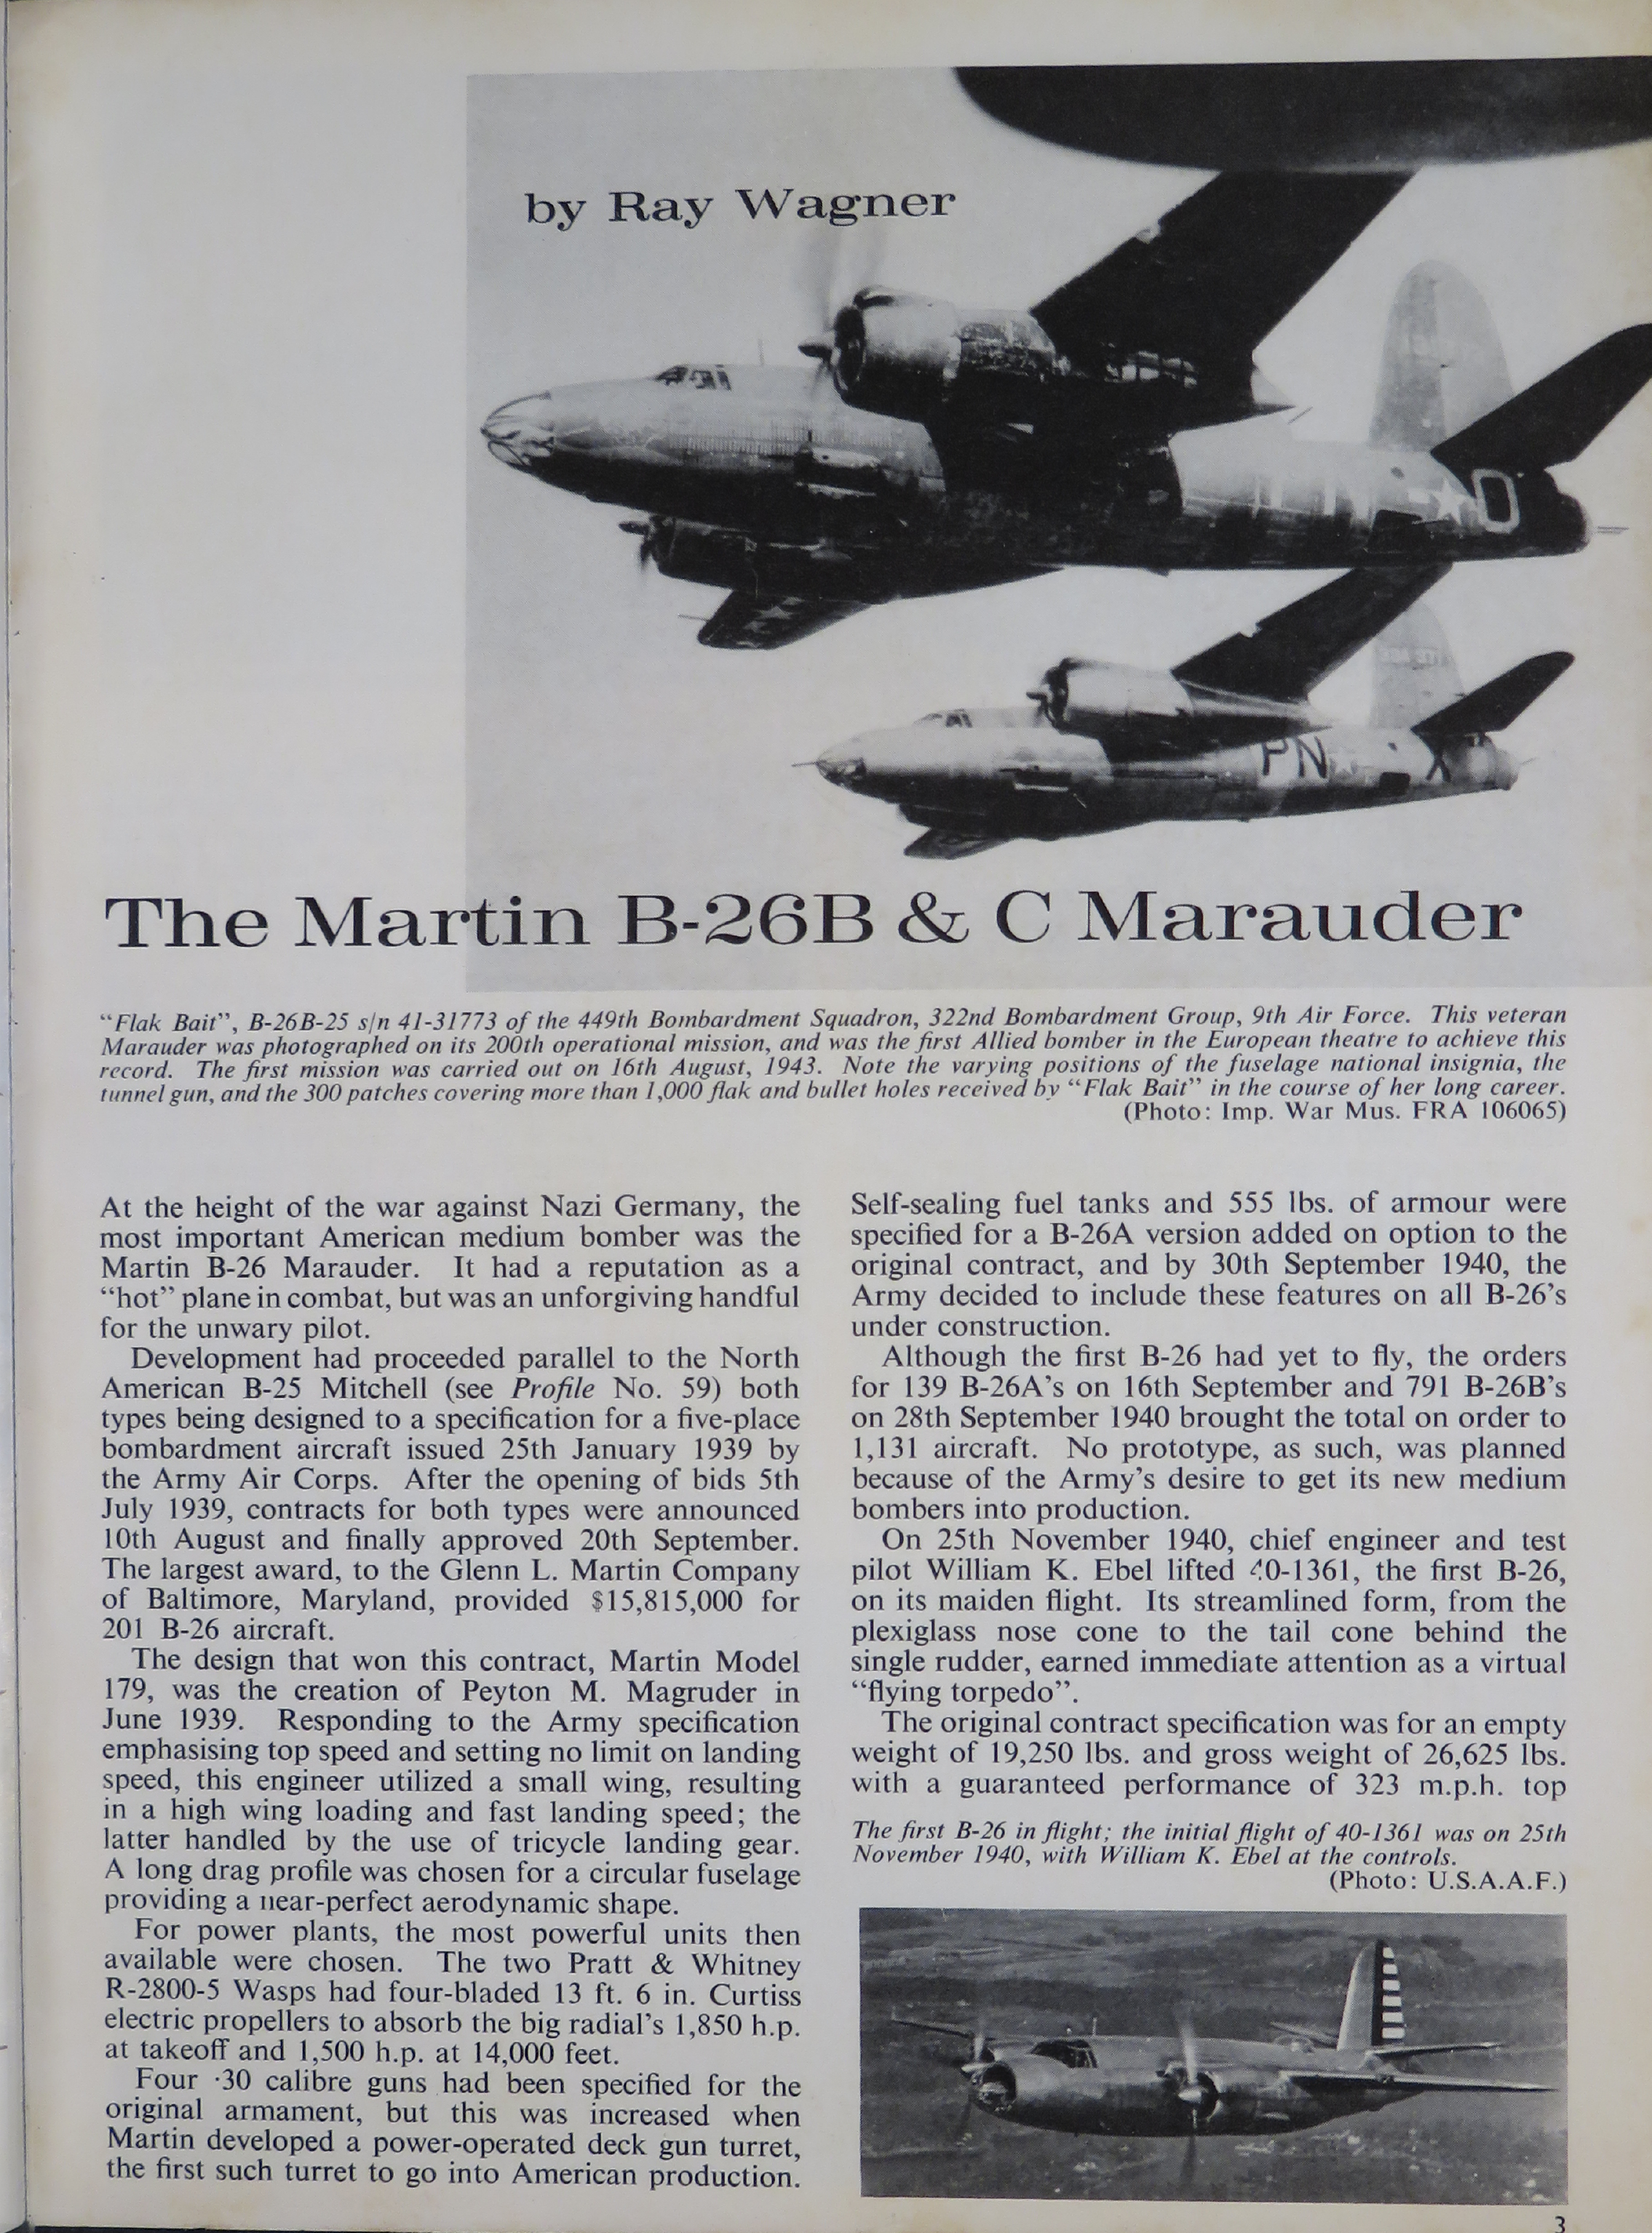 Sample page 3 from AirCorps Library document: Profile Publications - The Martin B-26B & C Marauder